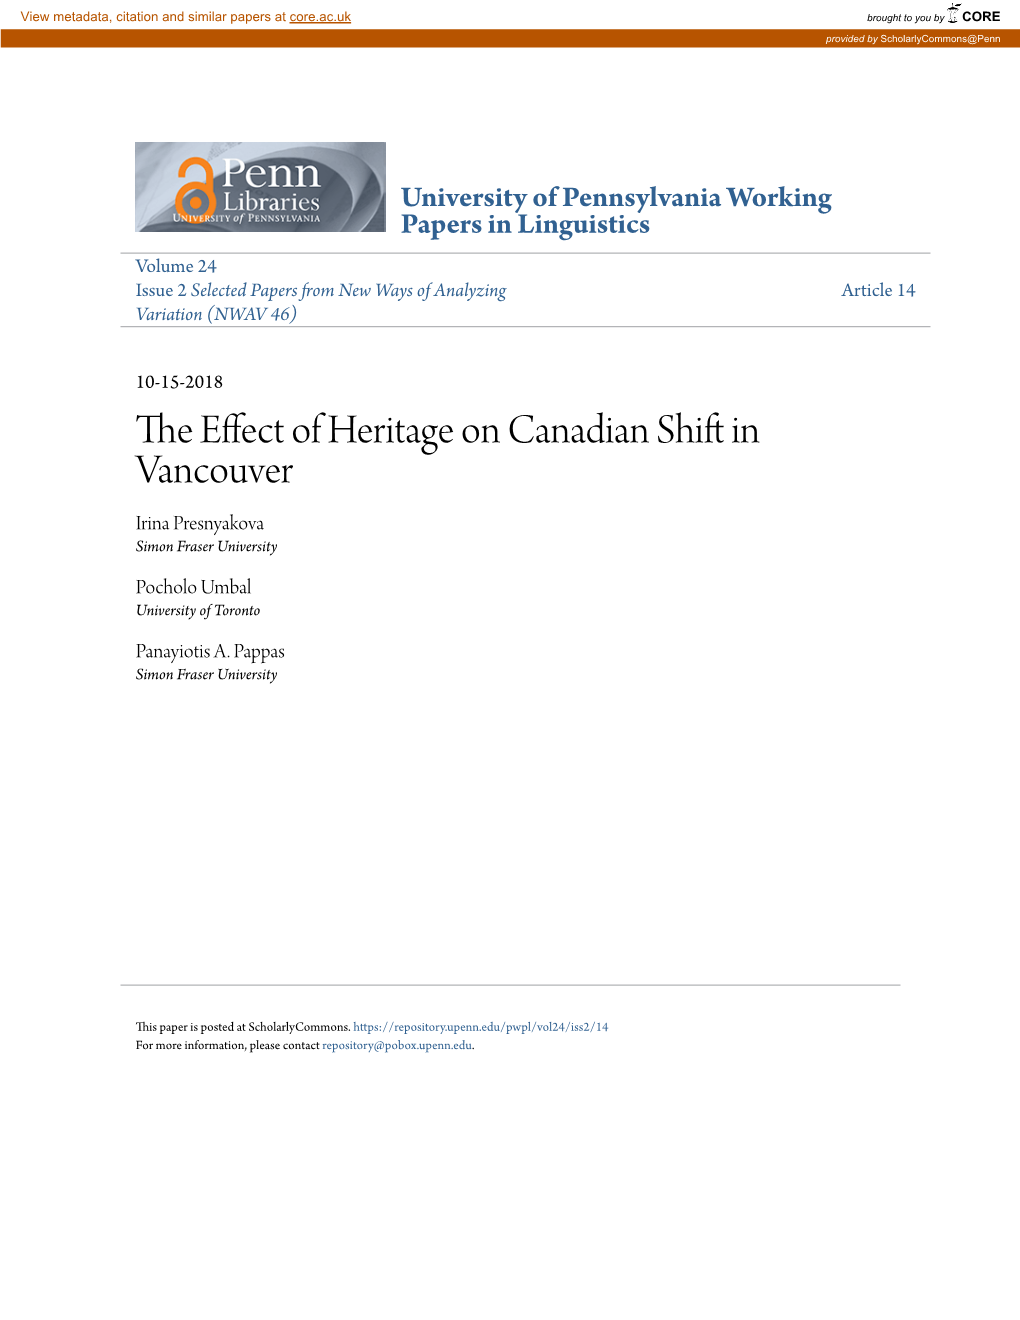 The Effect of Heritage on Canadian Shift in Vancouver